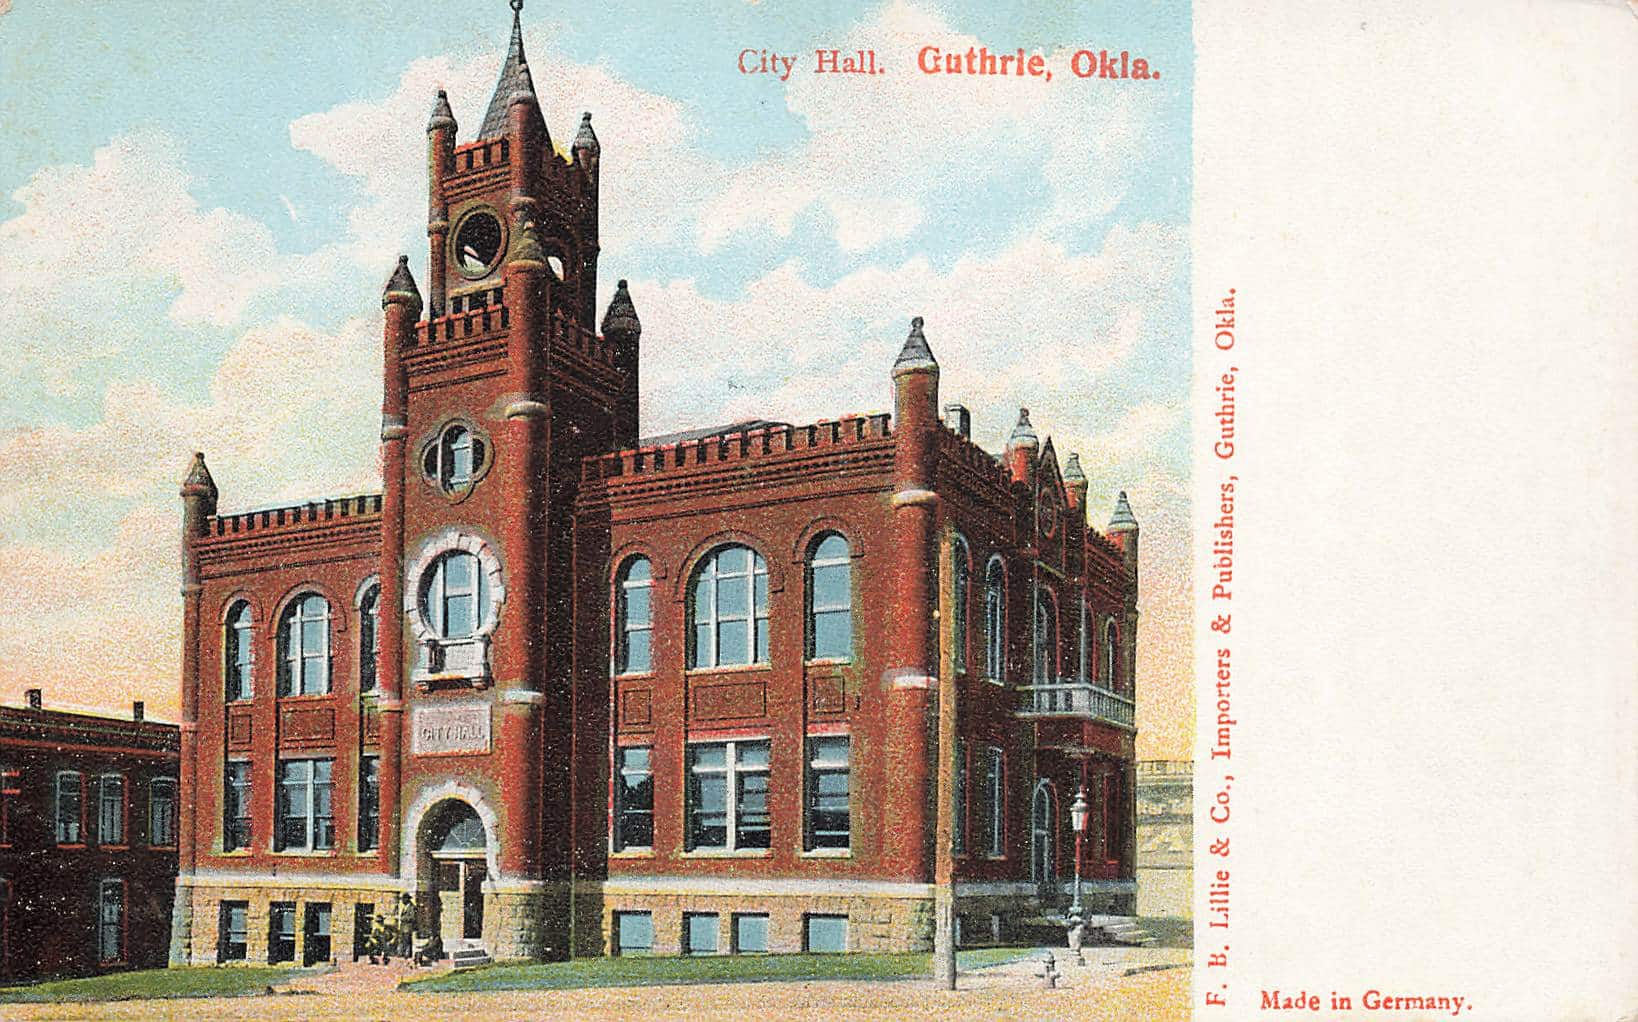 A rendering of the original Guthrie City Hall built in 1902.